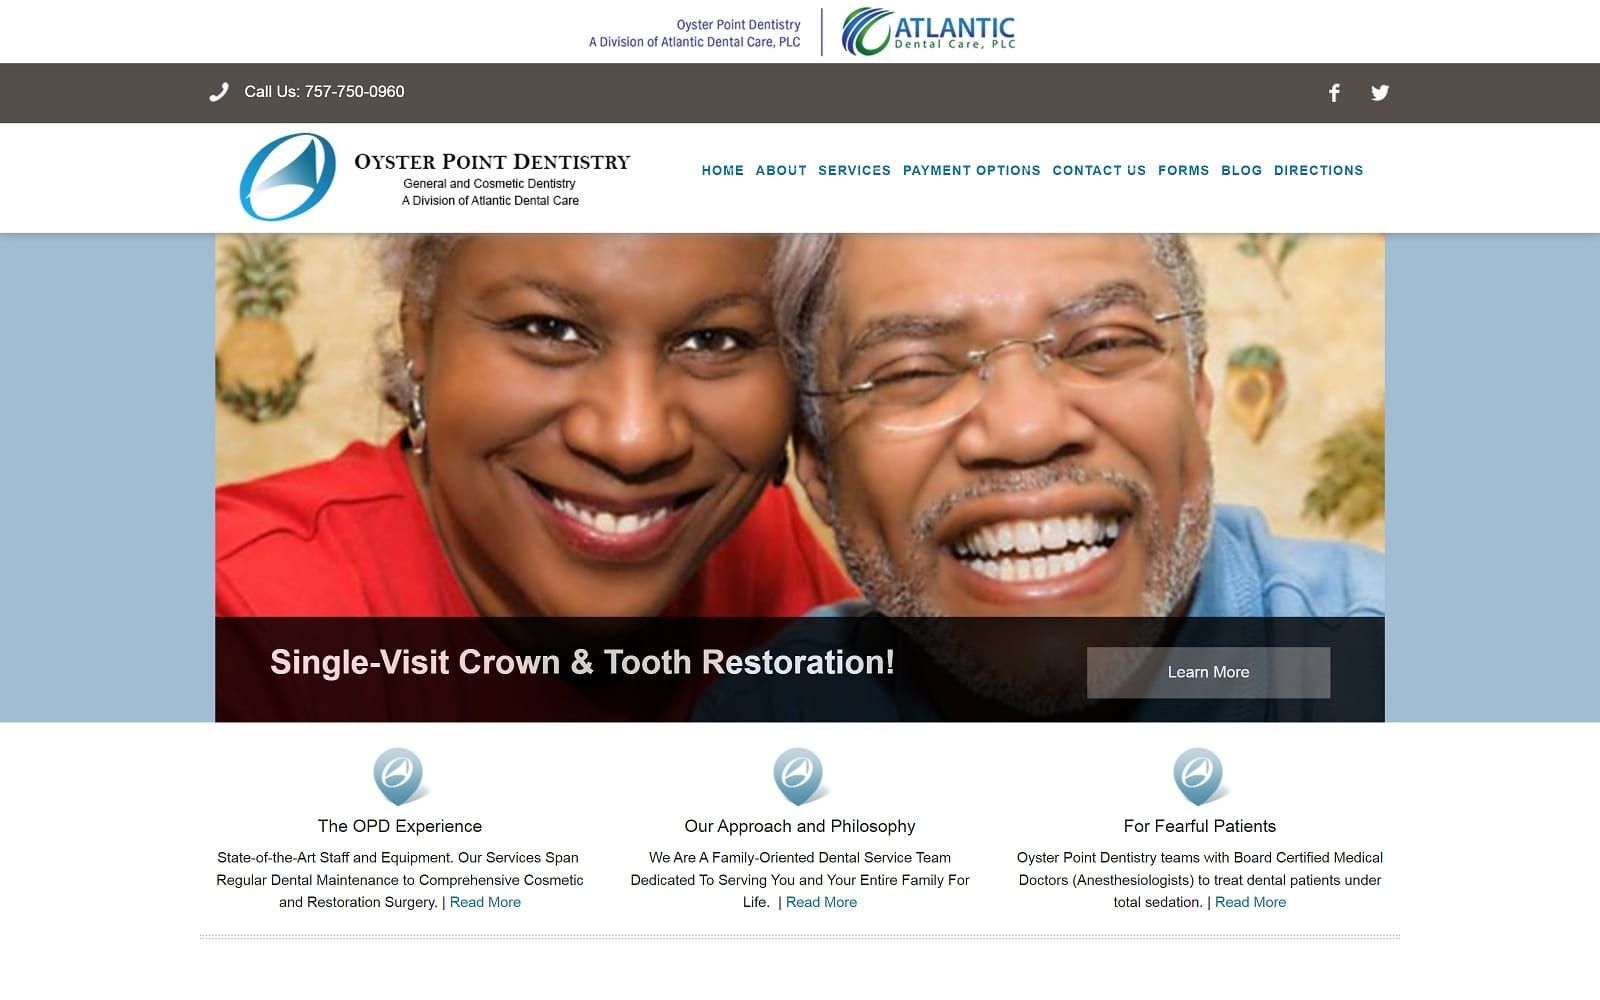 The screenshot of oyster point dentistry oysterpointdentistry. Com website